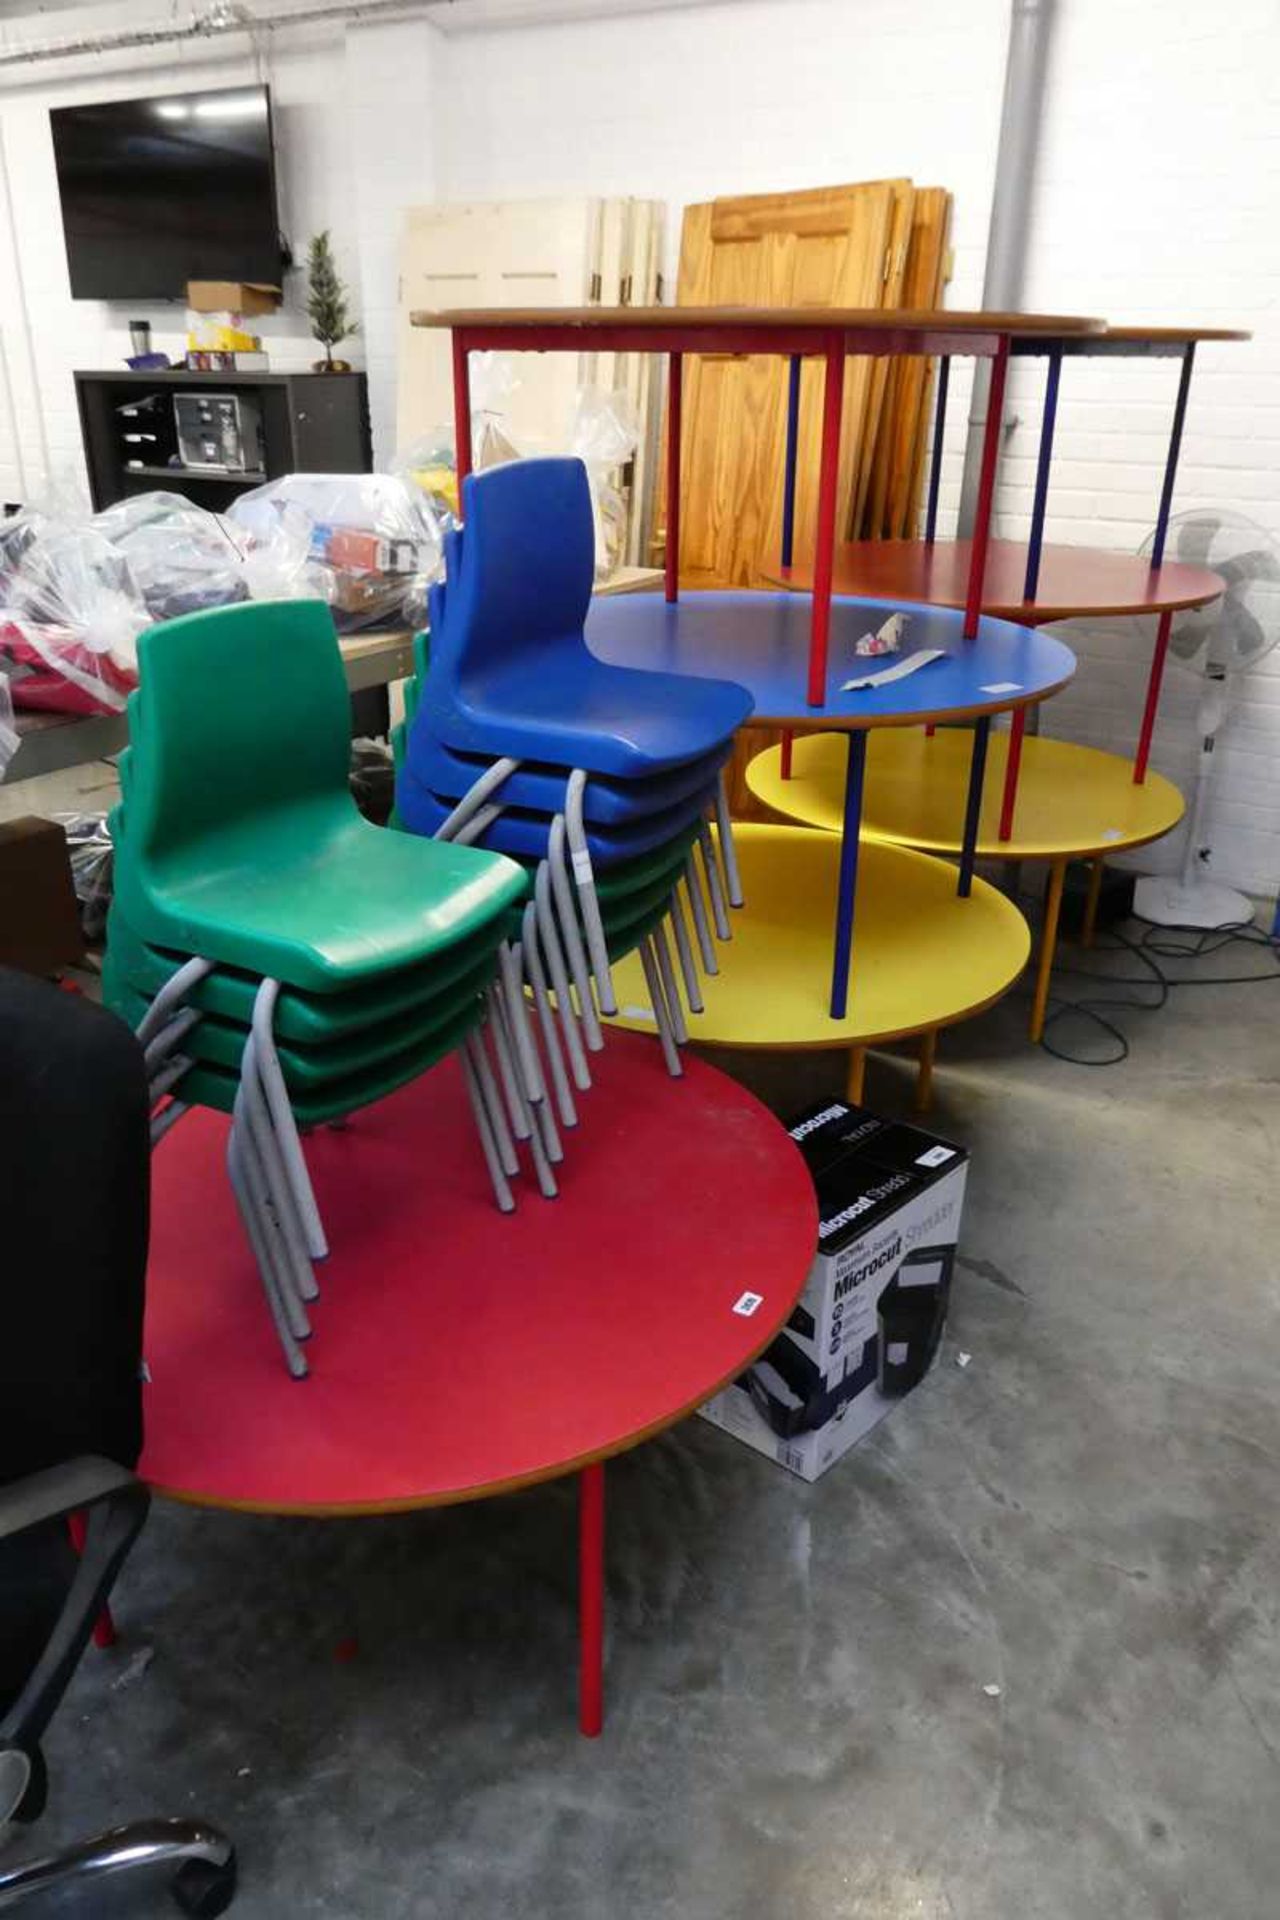 7 metal framed childrens circular tables together with 2 stacks of plastic childrens school chairs